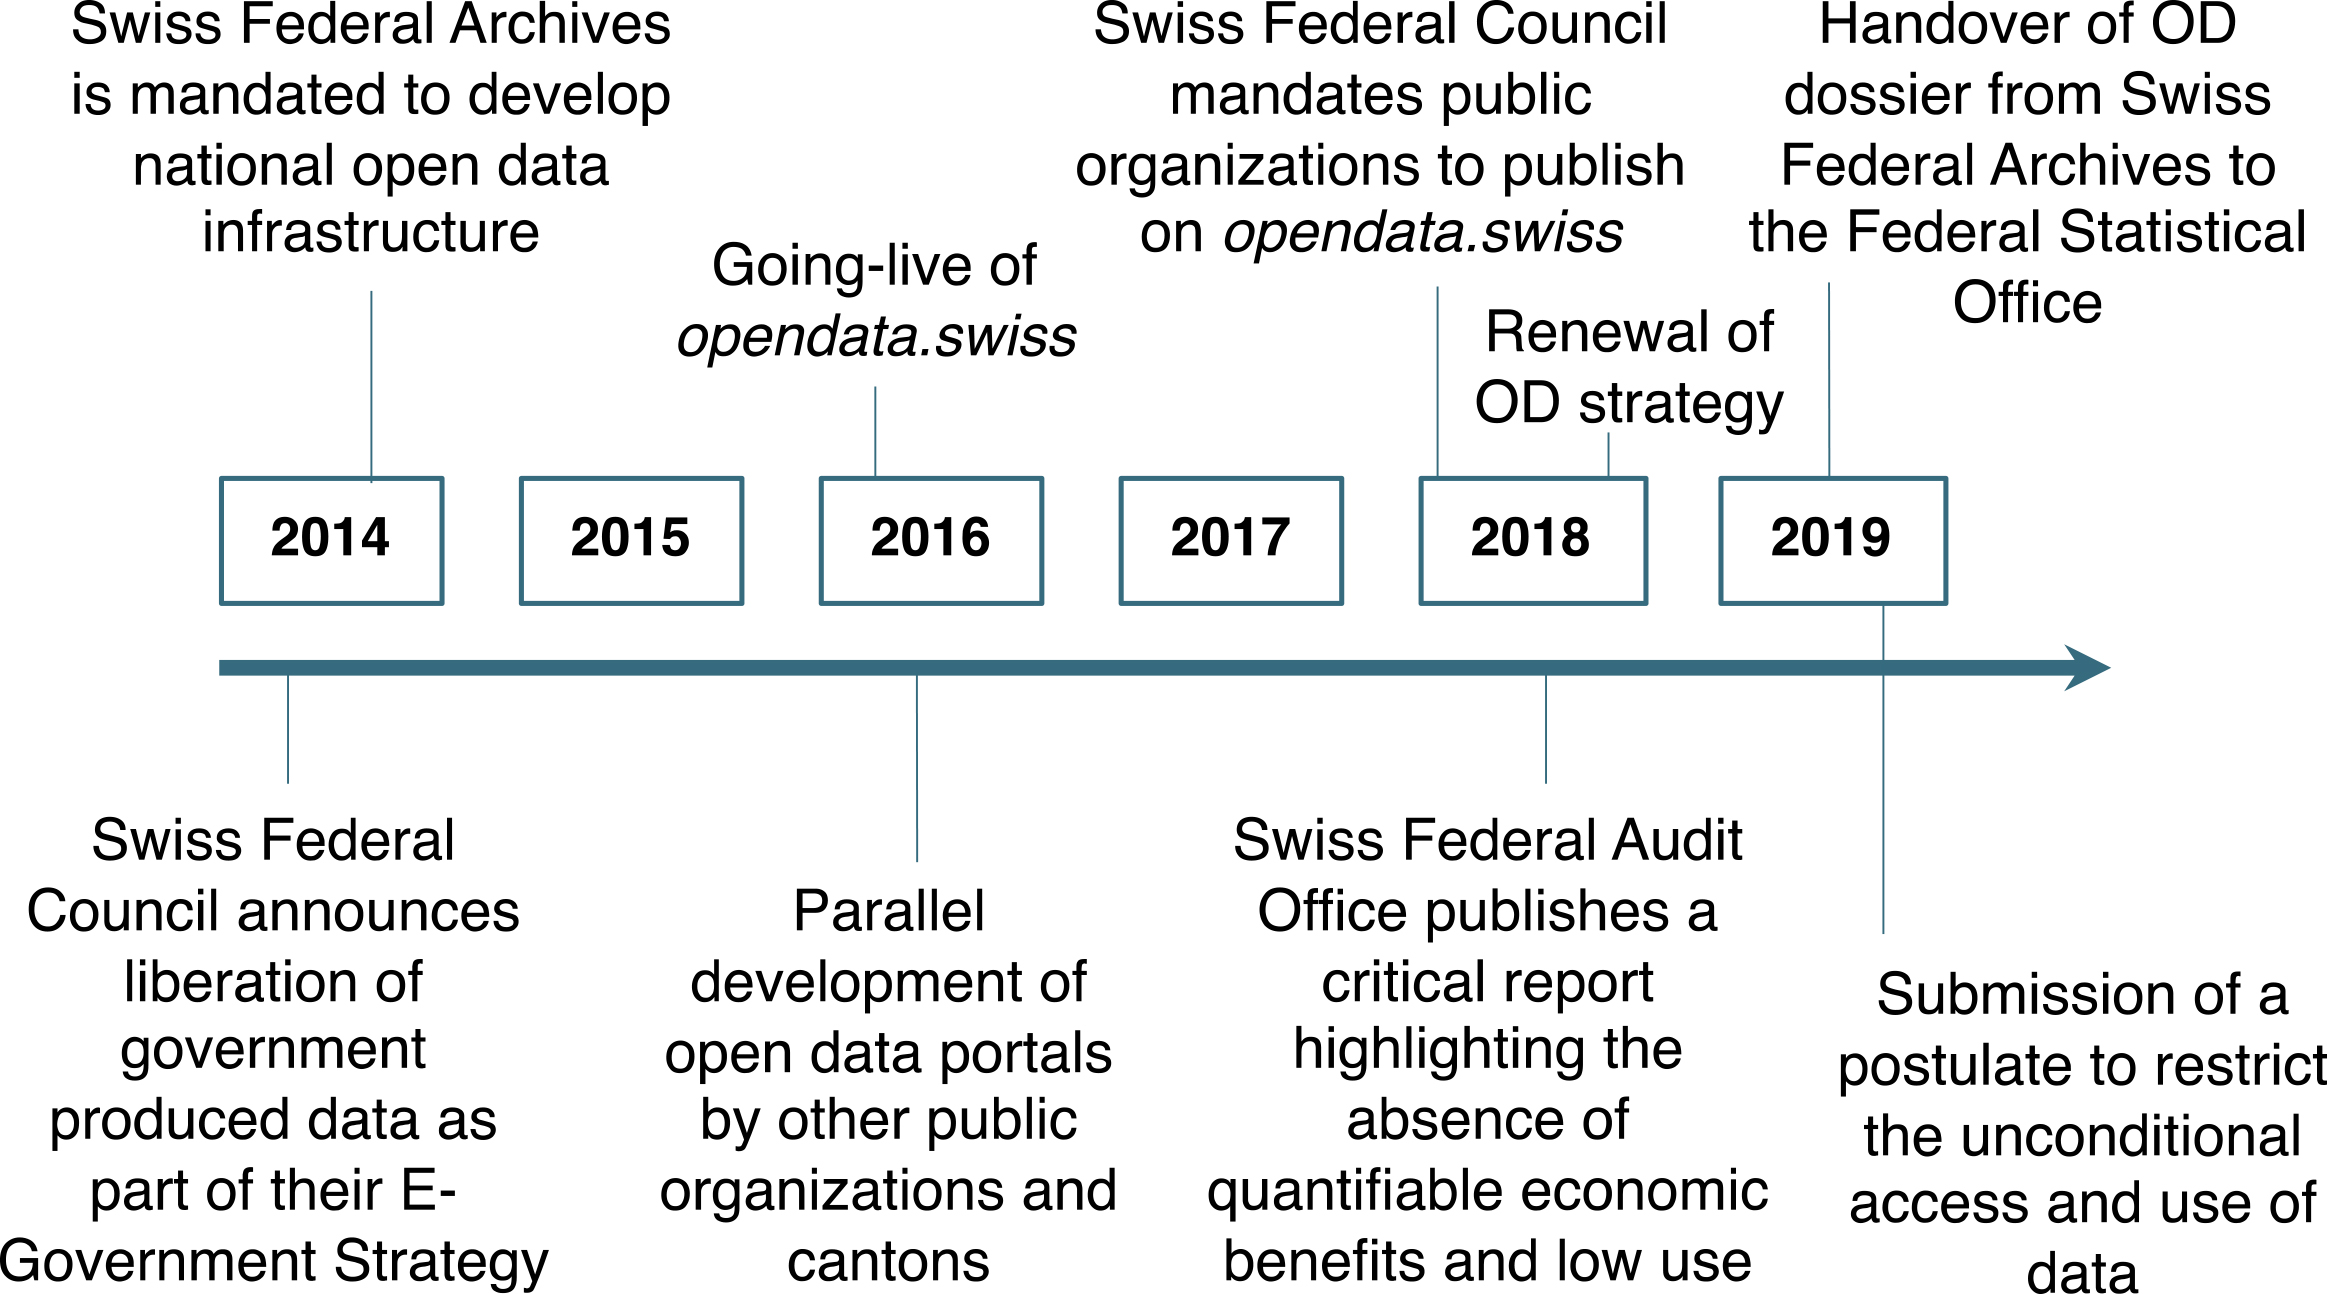 Chronology of key events related to the introduction of OGD in Switzerland.